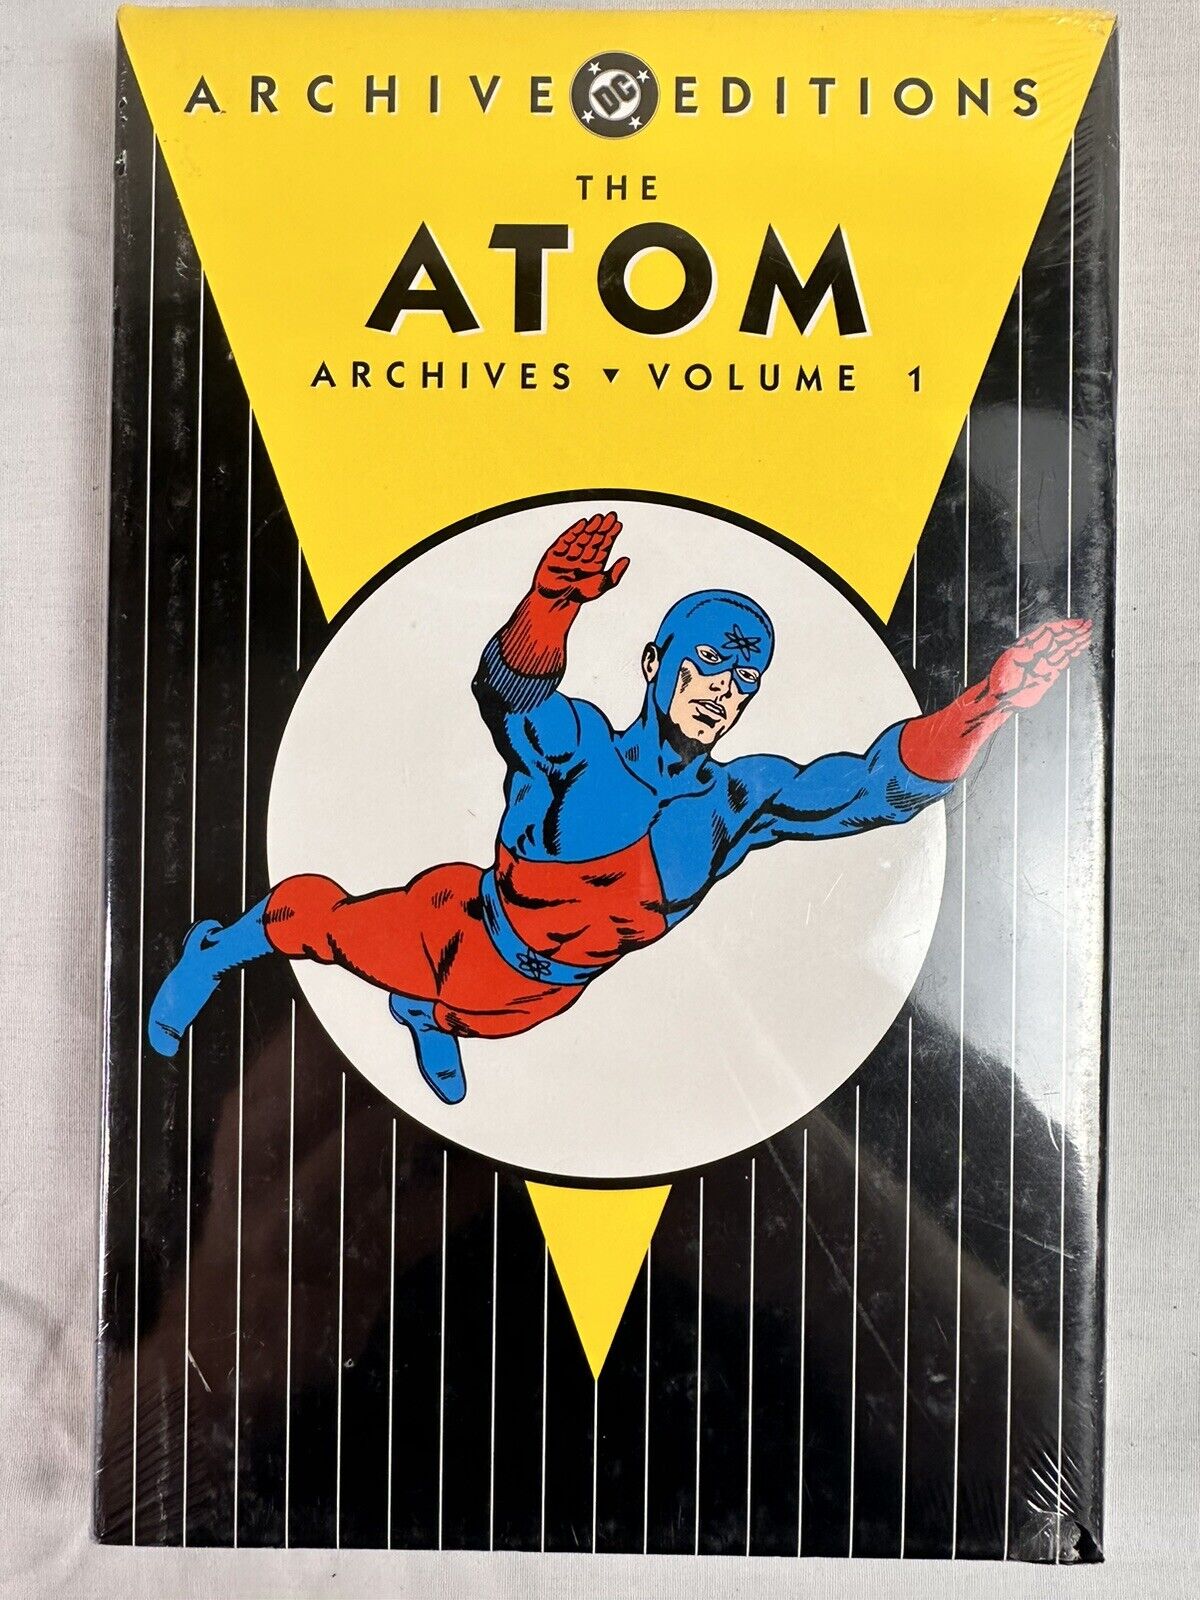 The Atom Archives Volume #1 (DC Comics, August 2001) New Sealed Hardcover